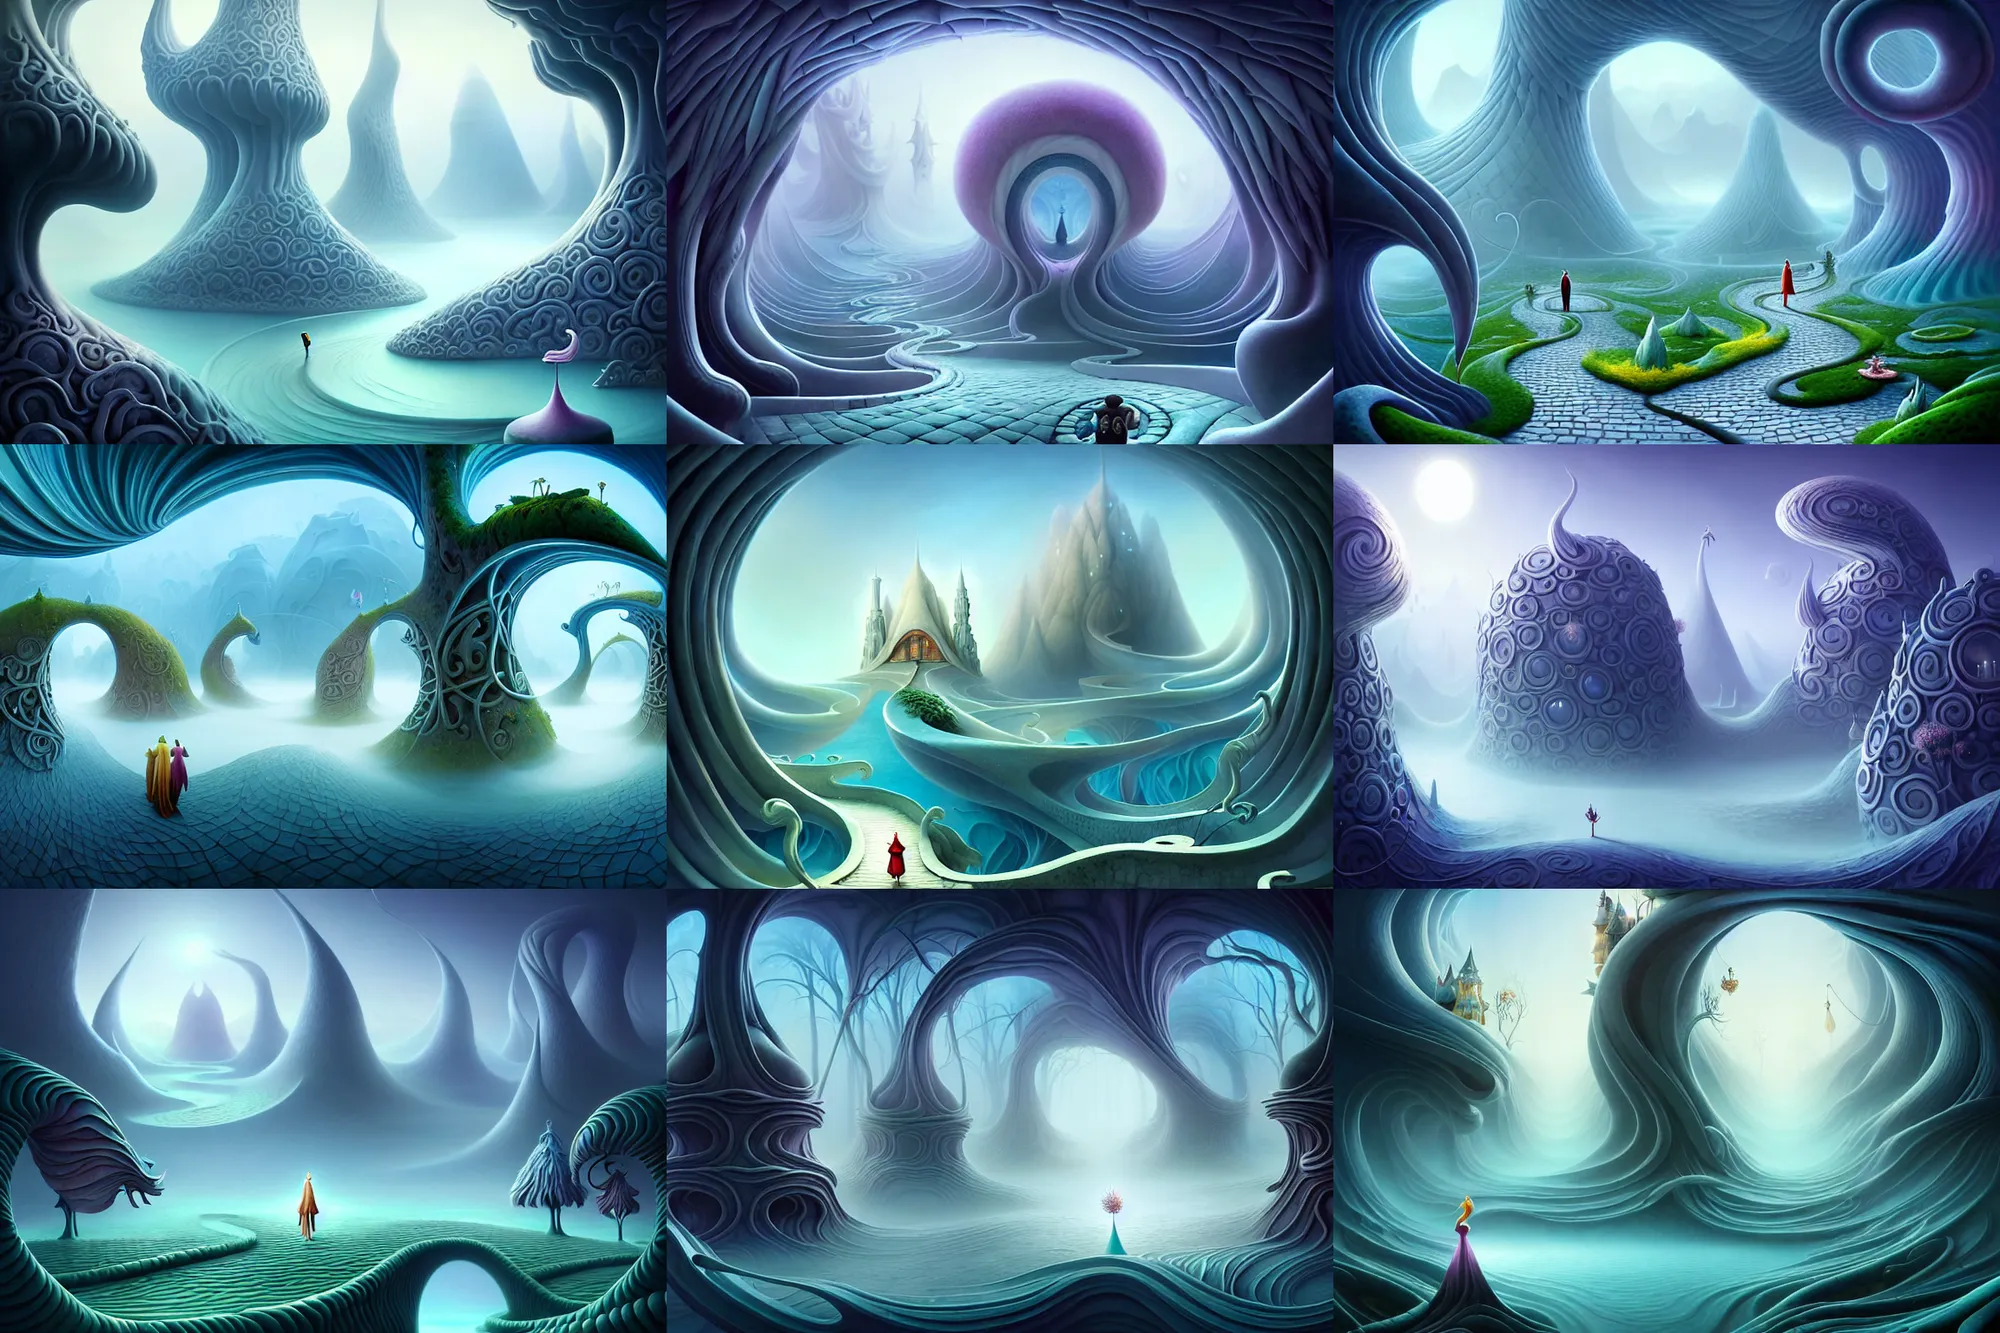 Prompt: an epic elite mysterious whimsical masterpiece fantasy matte painting of a winding path through arctic dream worlds with surreal architecture designed by heironymous bosch, structures inspired by heironymous bosch's garden of earthly delights, surreal ice interiors by cyril rolando and cyril rolando and asher durand and natalie shau, insanely detailed and intricate, very complex, elegant